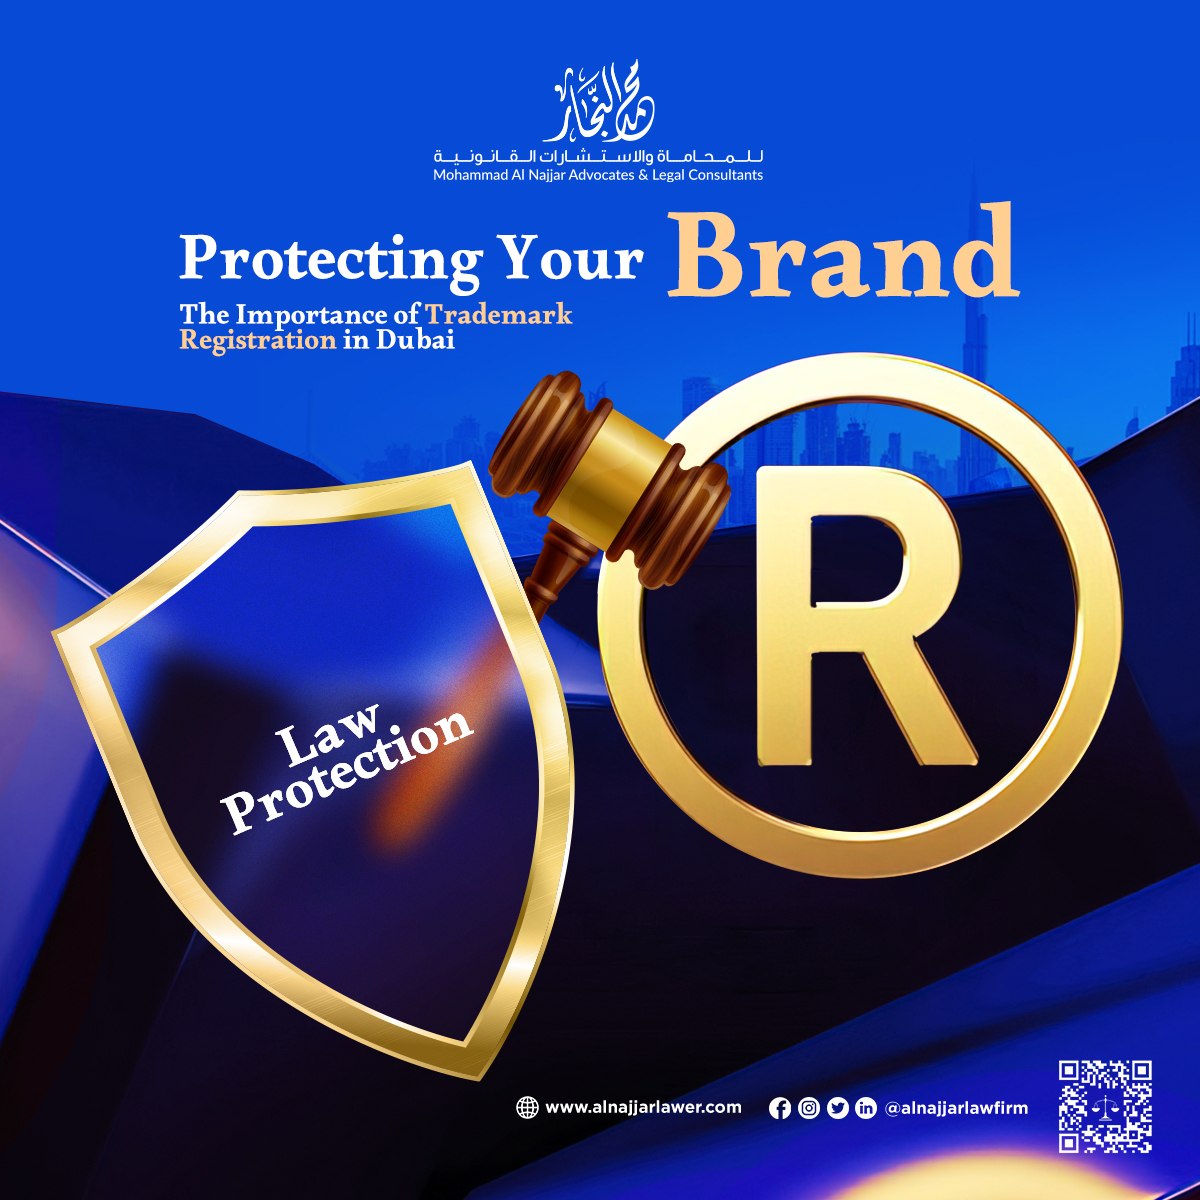 In today's competitive business landscape, safeguarding your brand is essential. Learn the ins and outs of trademark registration in Dubai and why it matters to your business in our latest article.

Read More: bit.ly/43GD9Ou

#law #lawyer #Trademark #DubaiBusiness